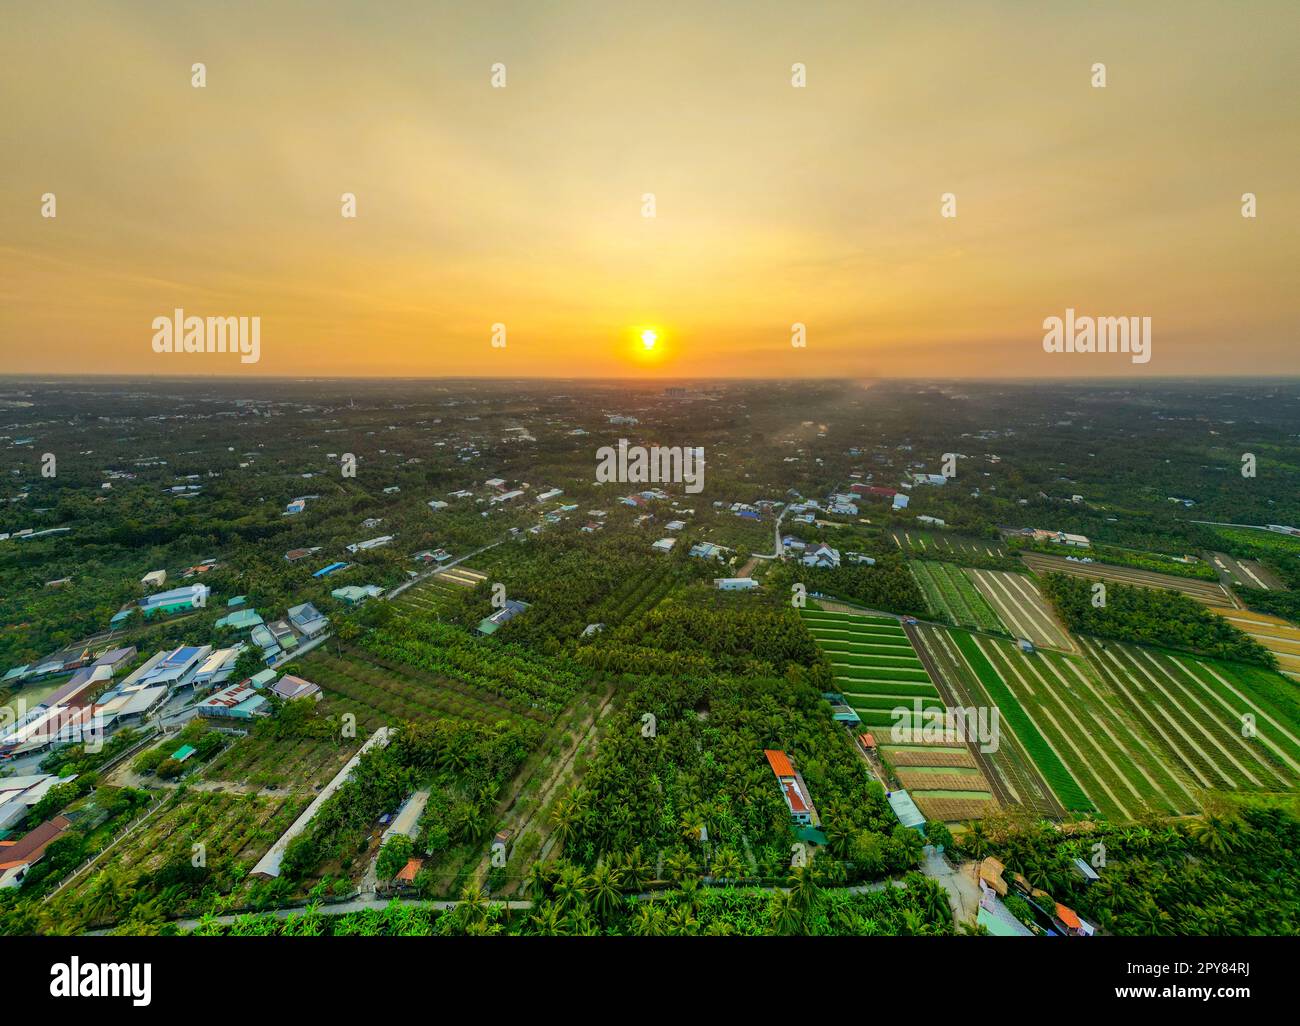 Golden Hour Magic: Breathtaking Sunset Over Tien Giang Province Fields with Serene River and Cityscape in Vietnam Stock Photo